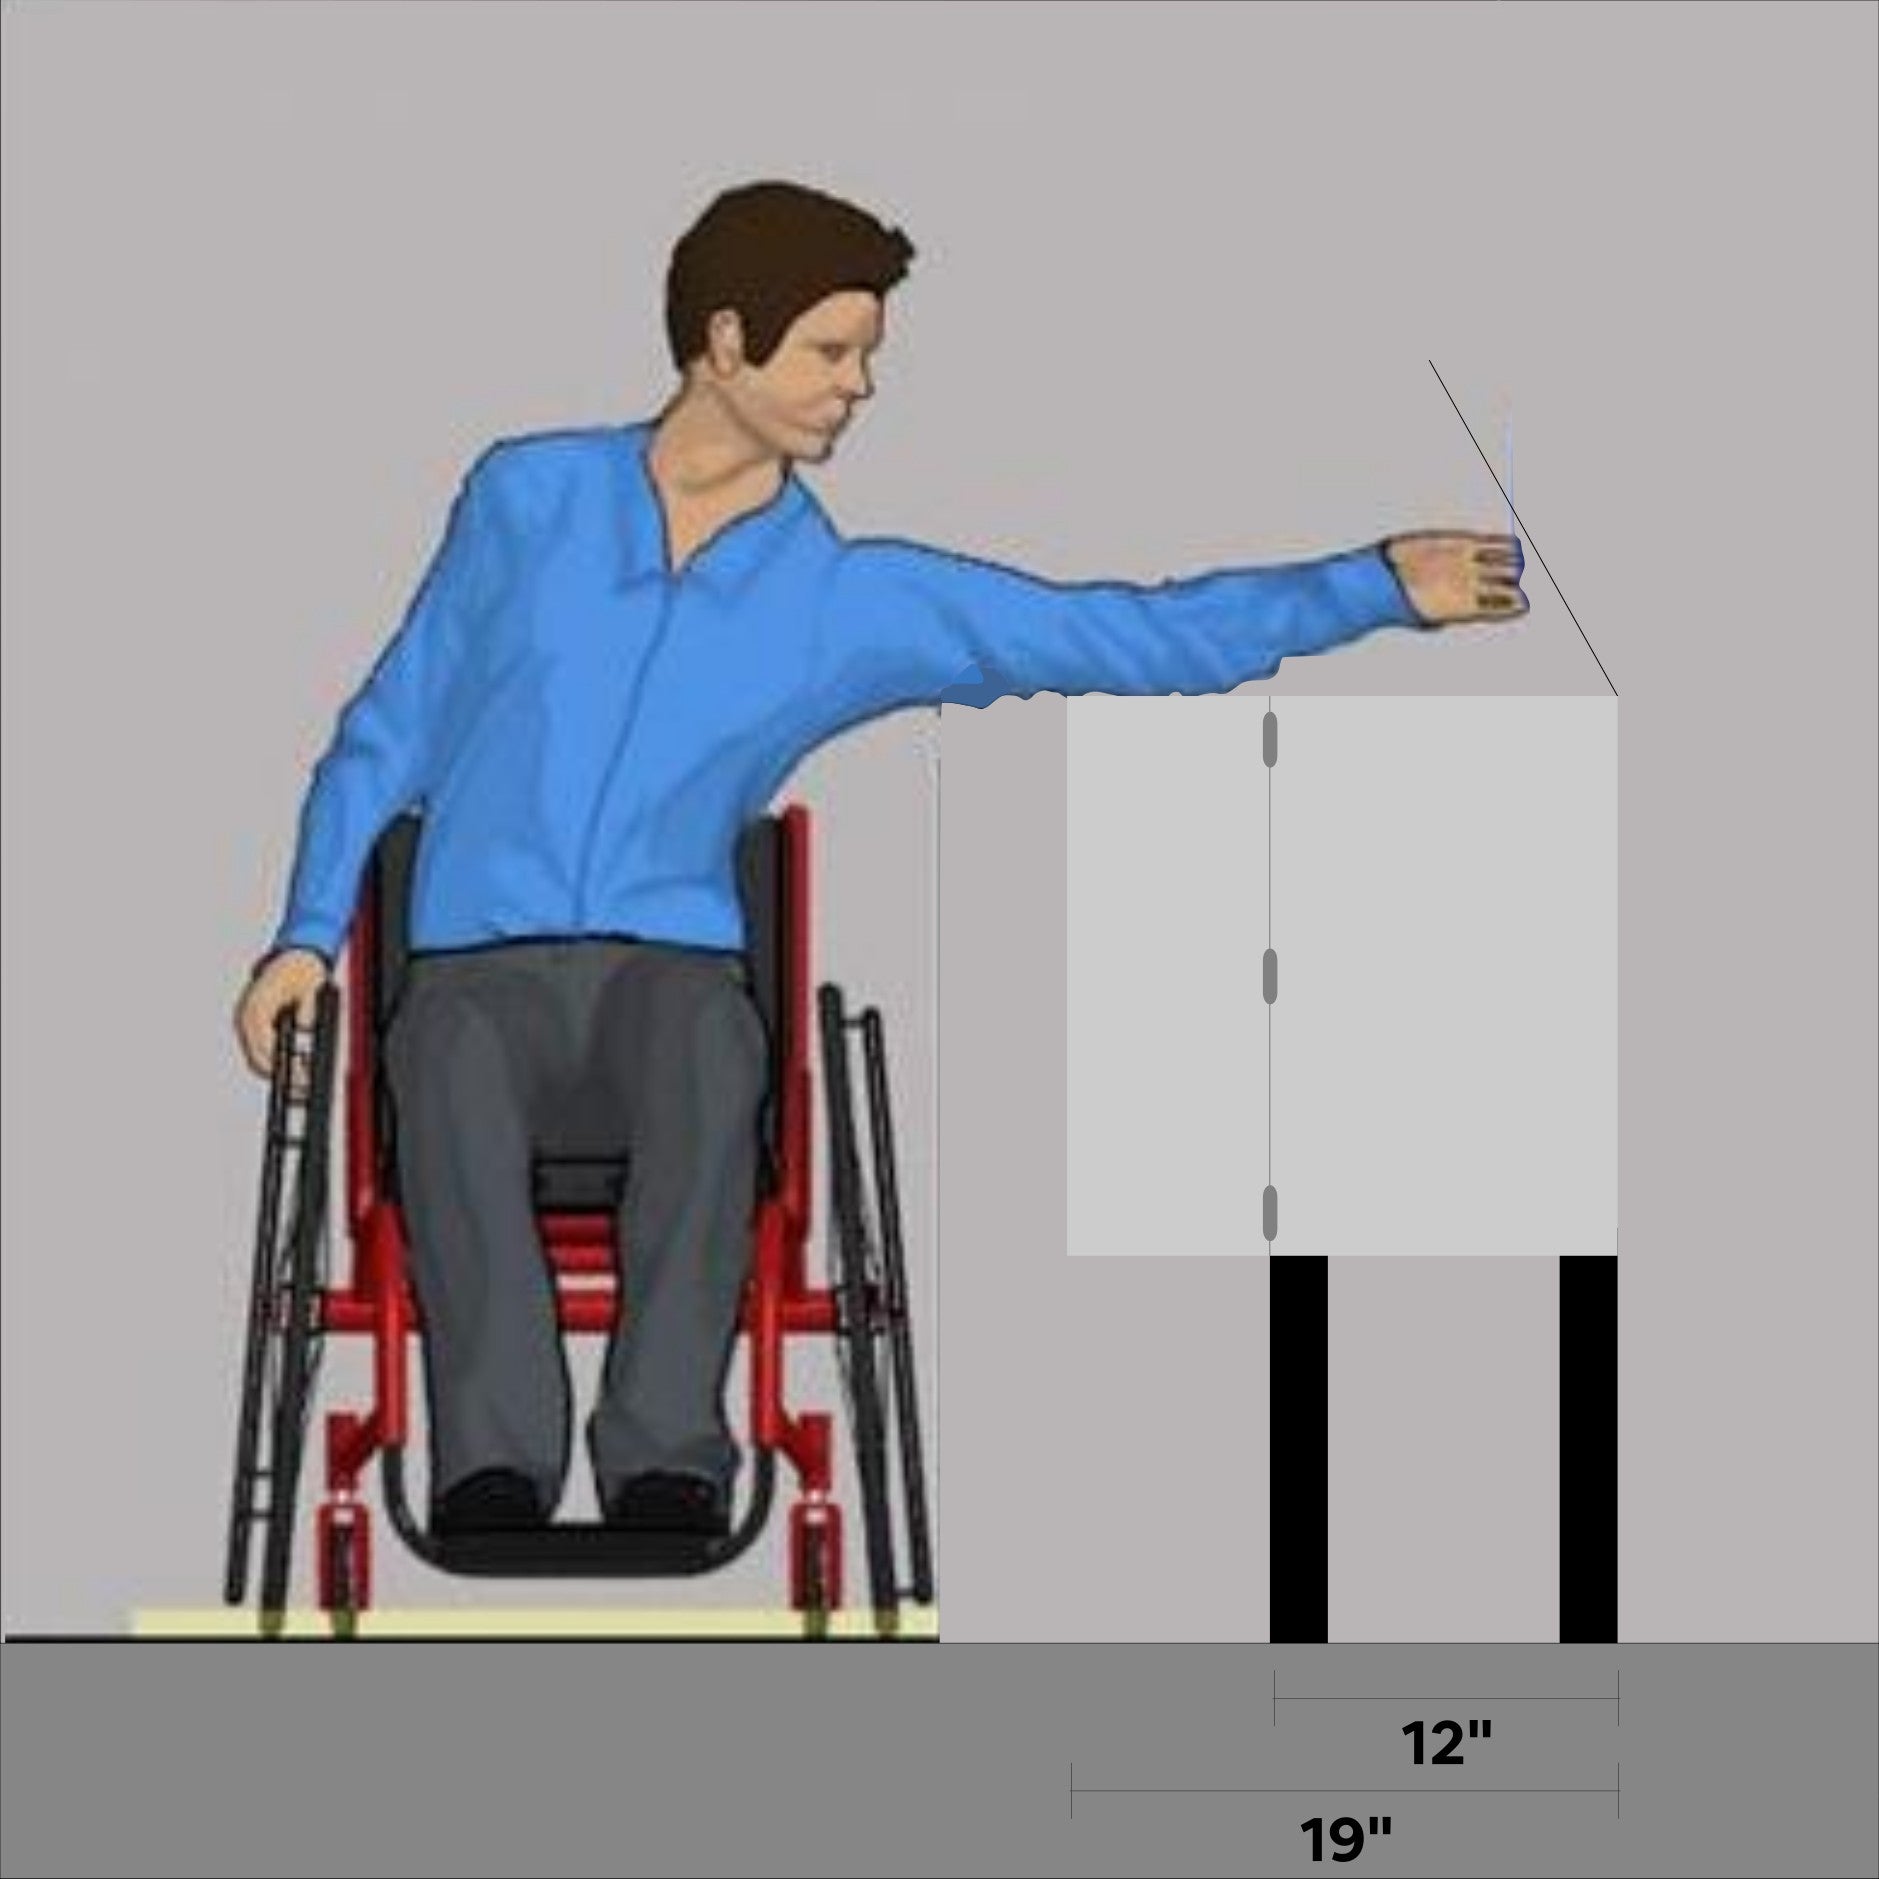 Individual in a wheelchair reaching sideway to a DorrCan trash can that has the lid and door opened. Including are dimension lines showing the width of the trash can as 12", and the width the open door to the back of the trash can as 19"